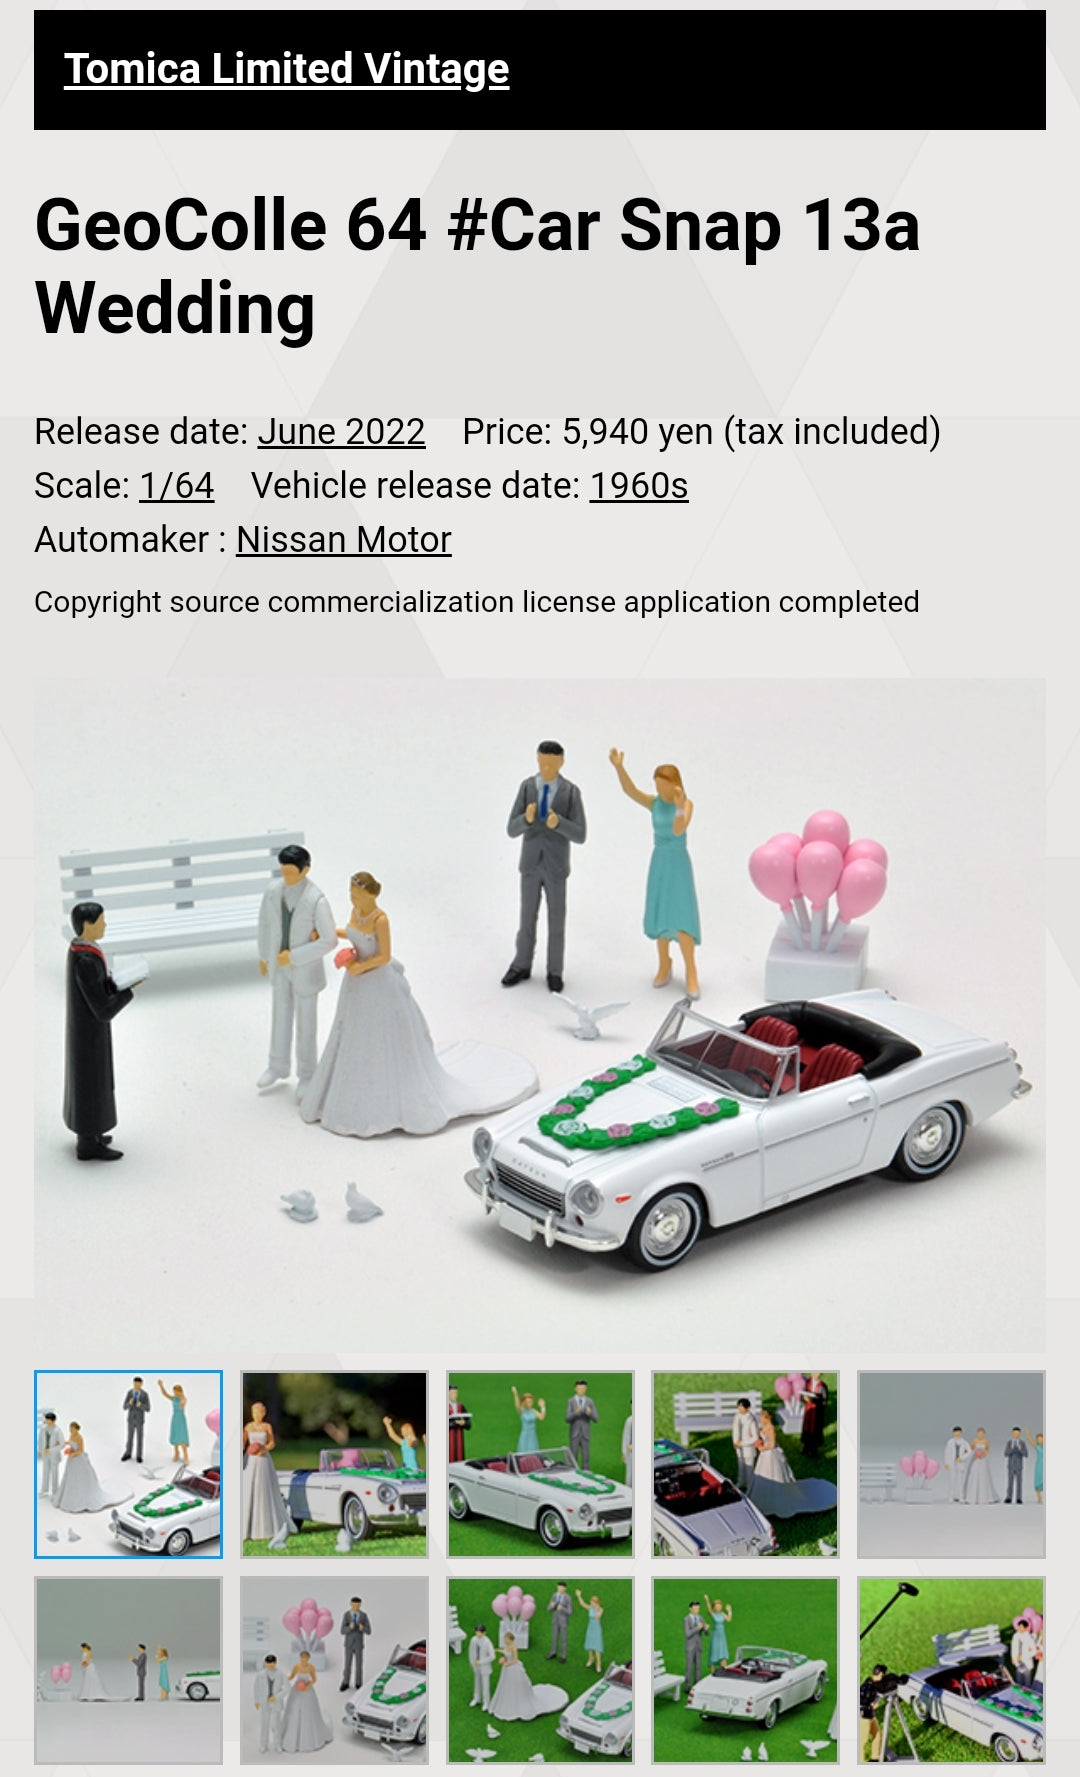 Tomica Limited Vintage Neo Diocolle 64 #Car Snap 13a Wedding
with Datsan 1600 sport Takara Tomy